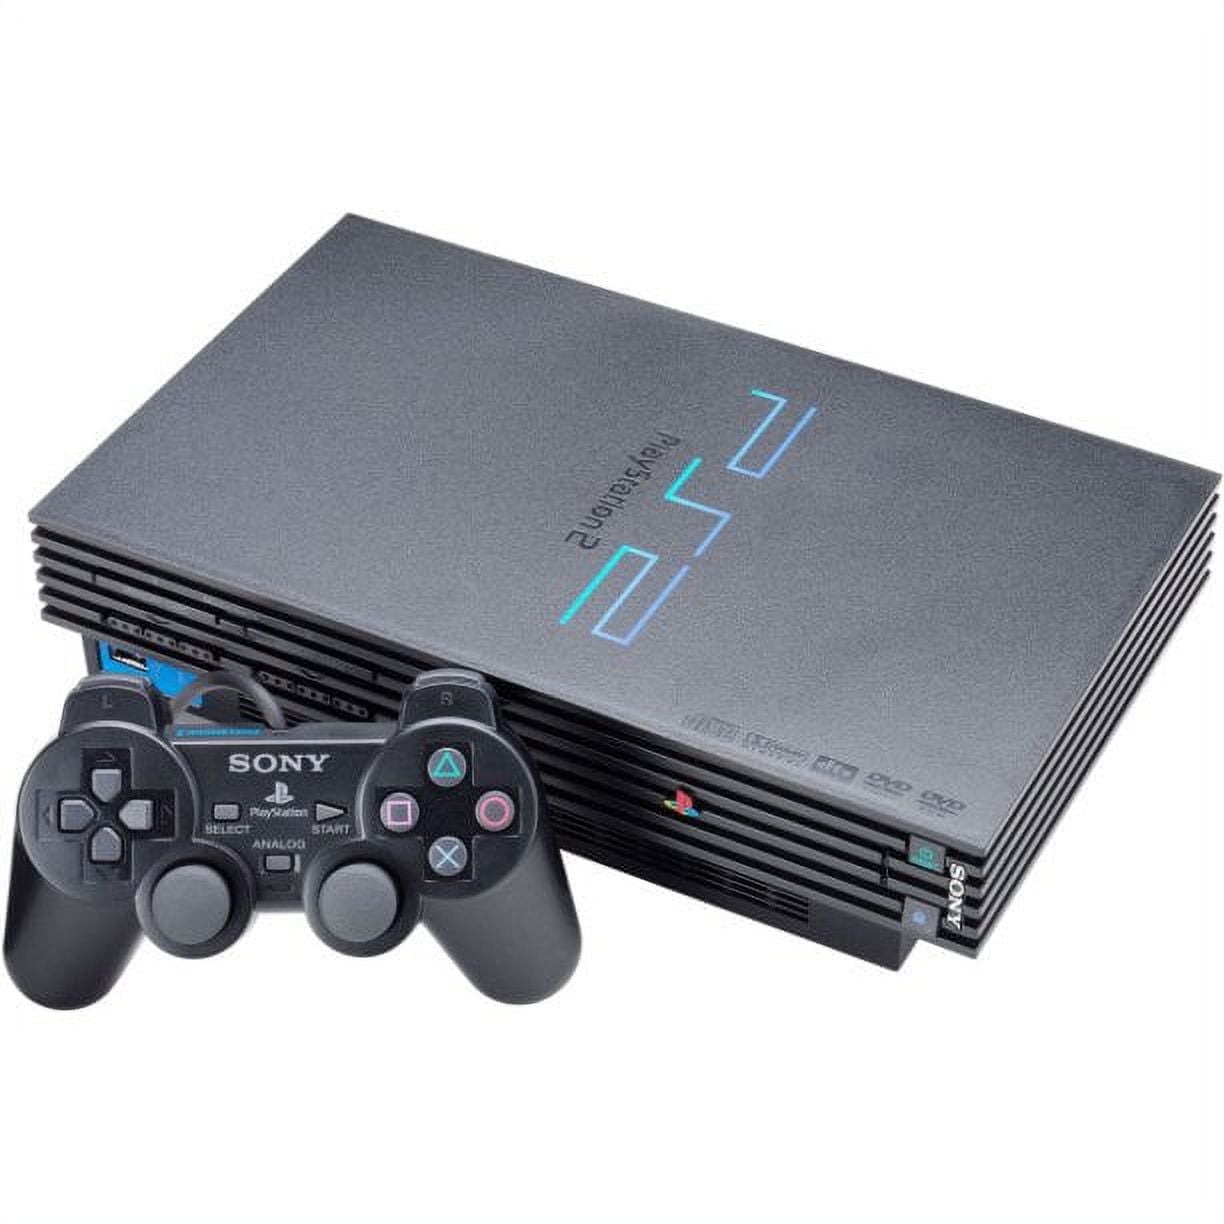 Refurbished Sony Playstation 2 PS2 Game Console - Walmart.com